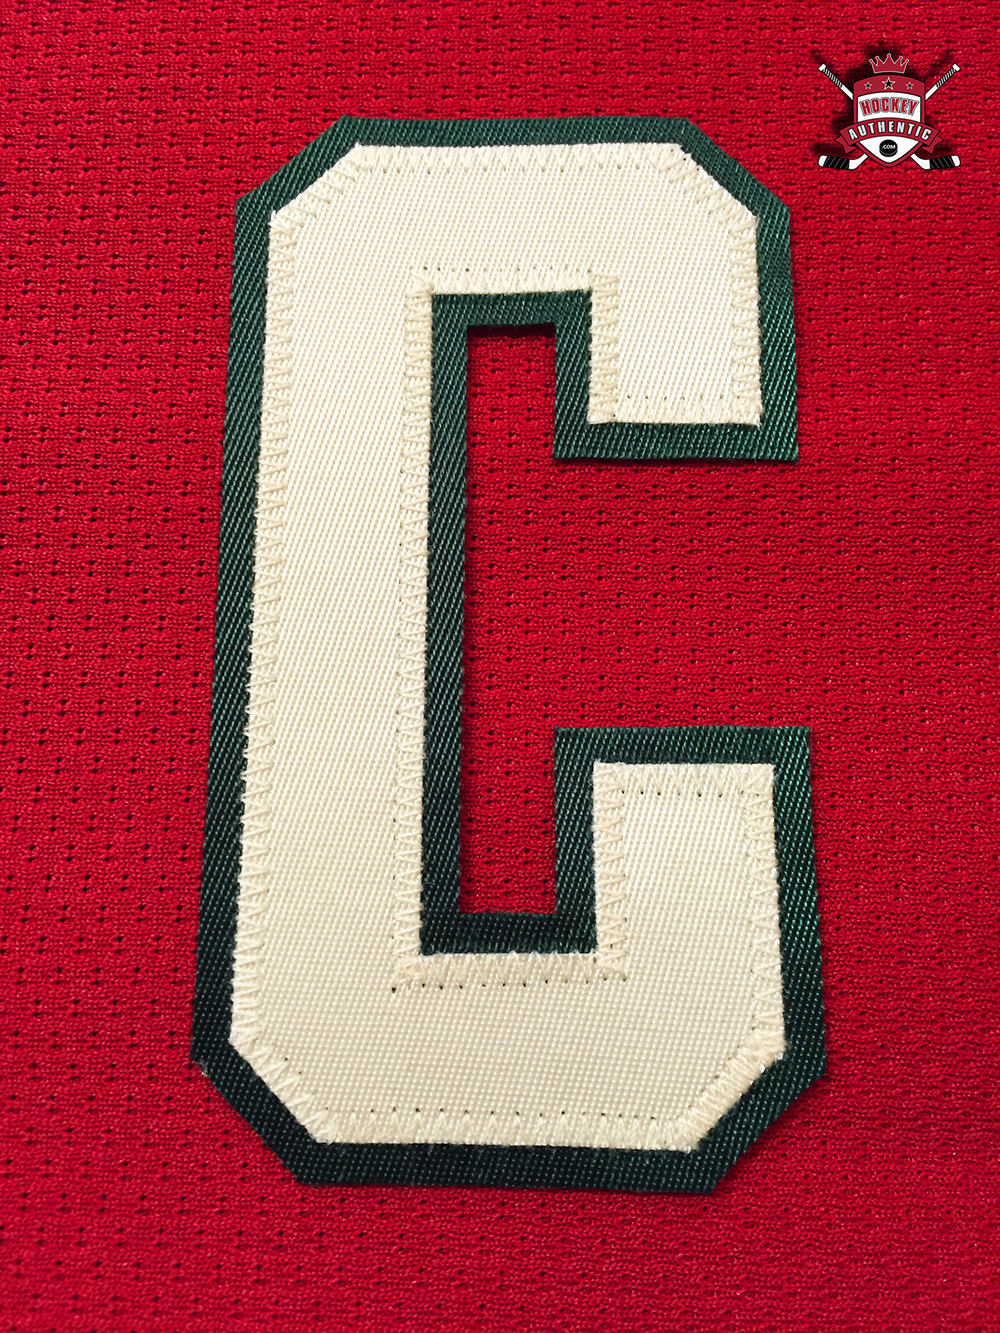 OFFICIAL PATCH FOR MINNESOTA WILD 